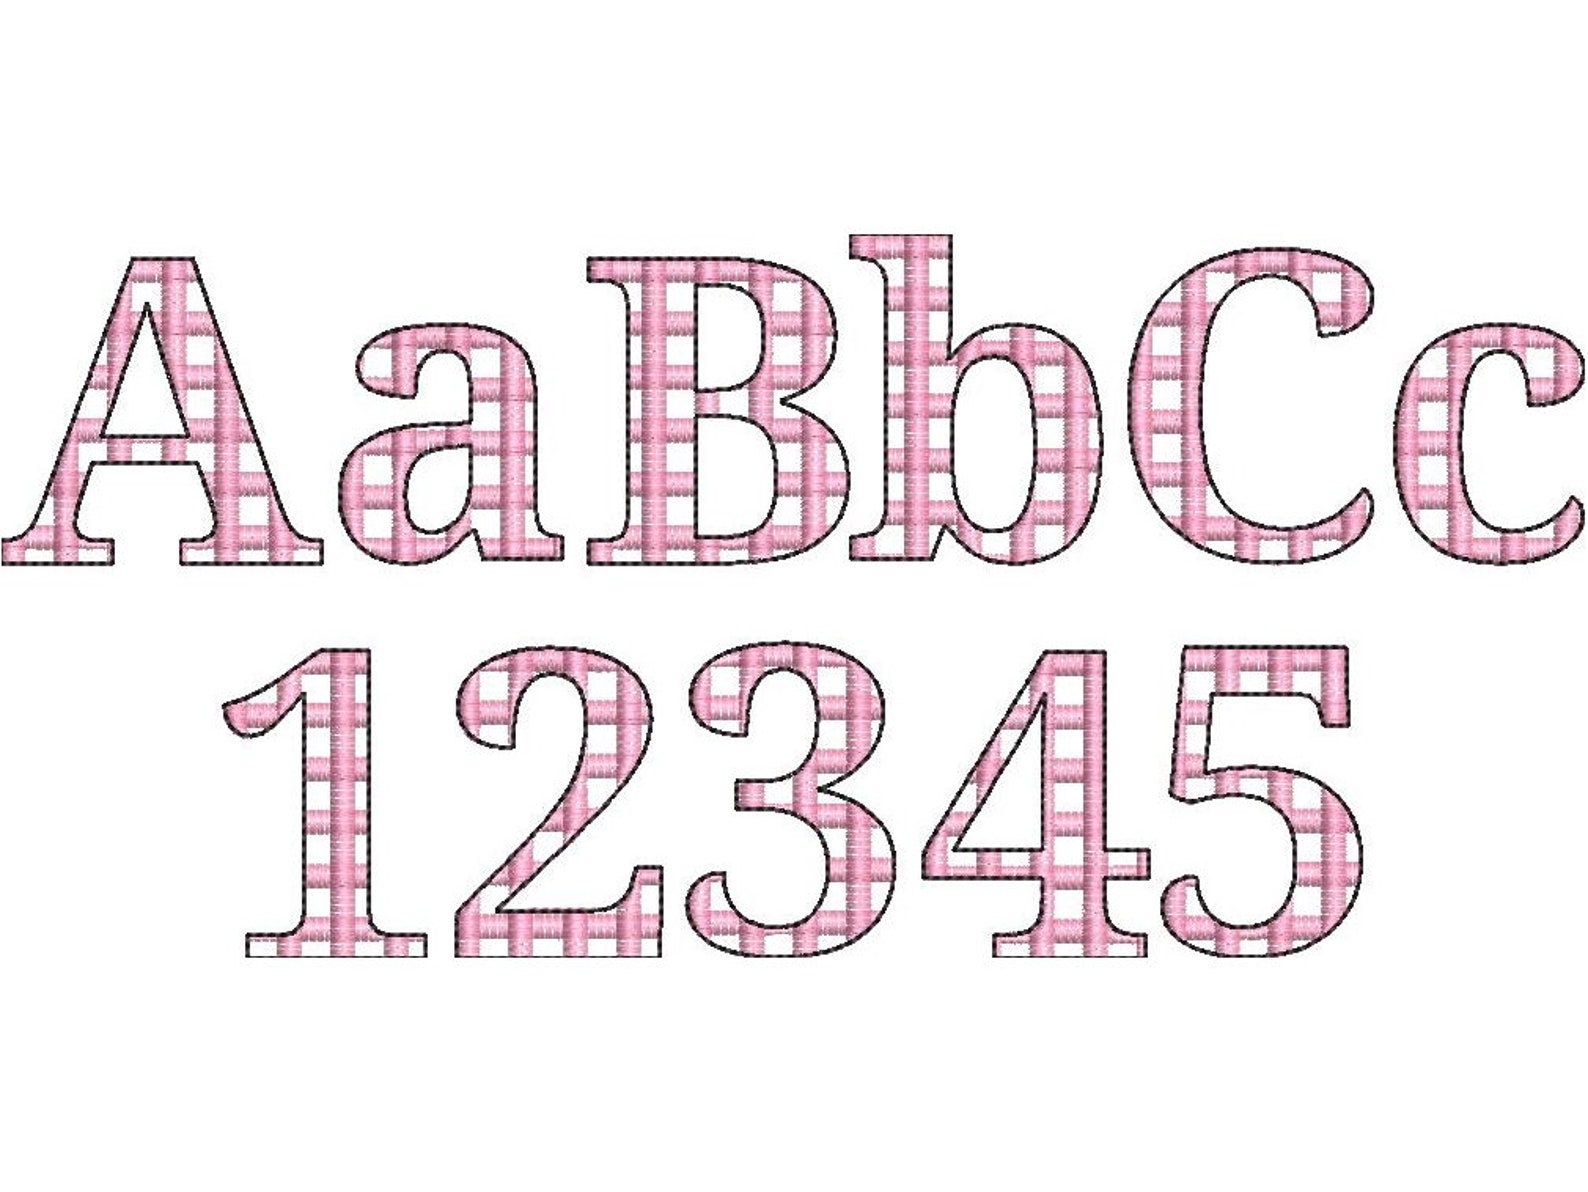 Classy Checkered Plaid Font Light Sketch Stitch Outline - Etsy